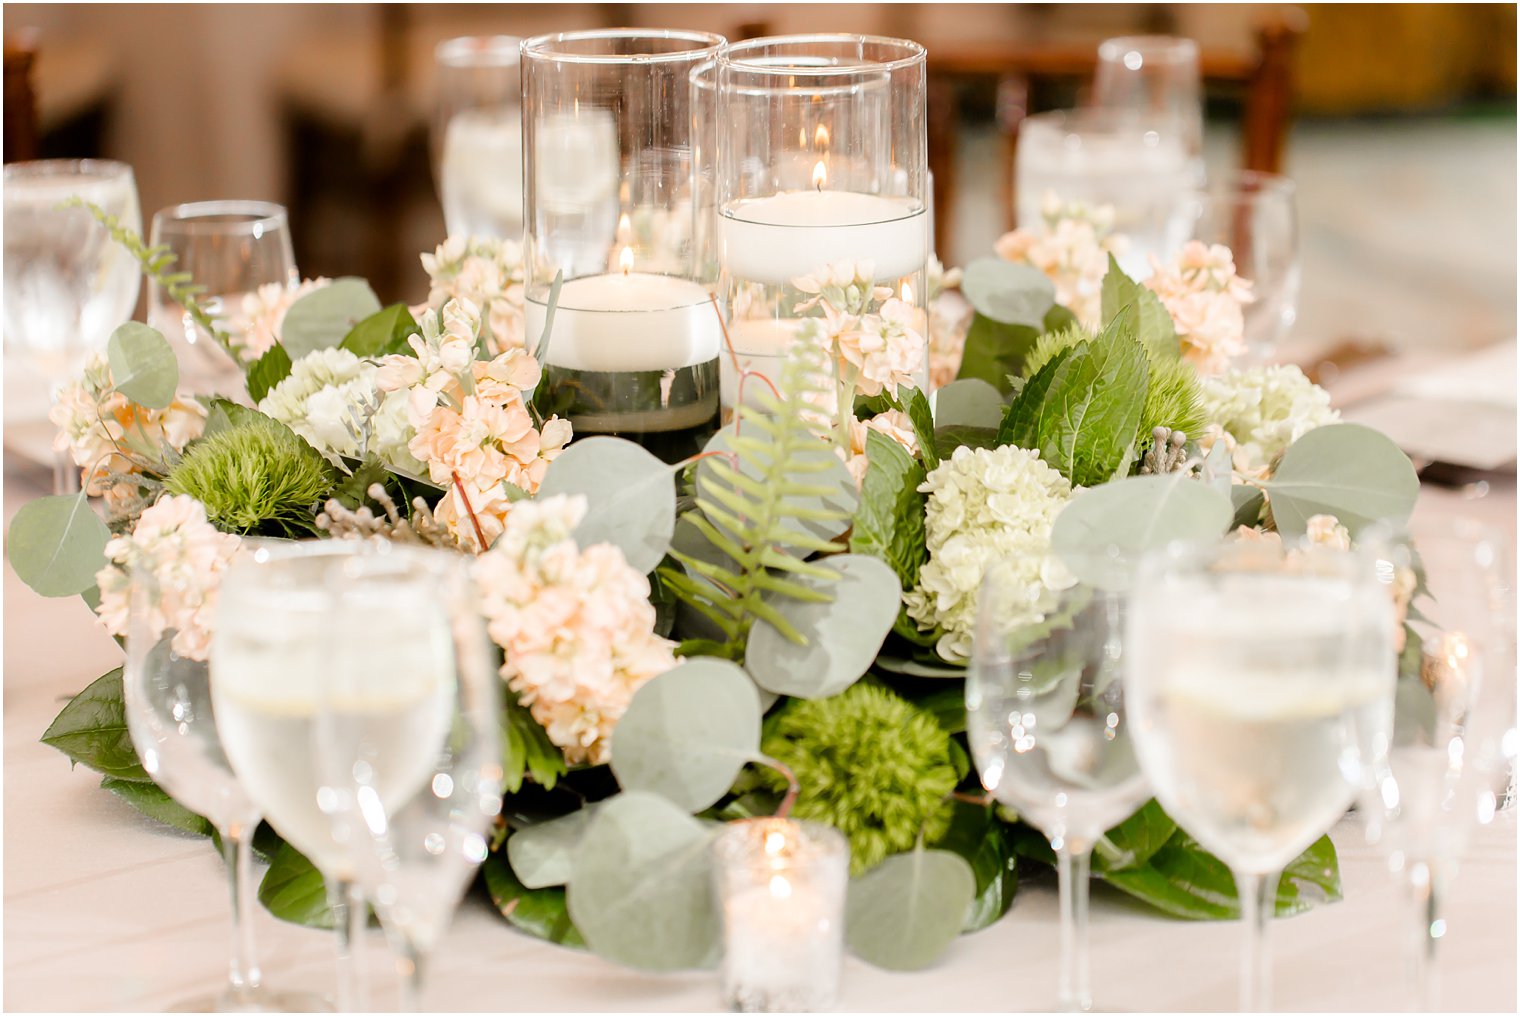 Floral center piece by Craig Kiely and Darryn Murphy Designs